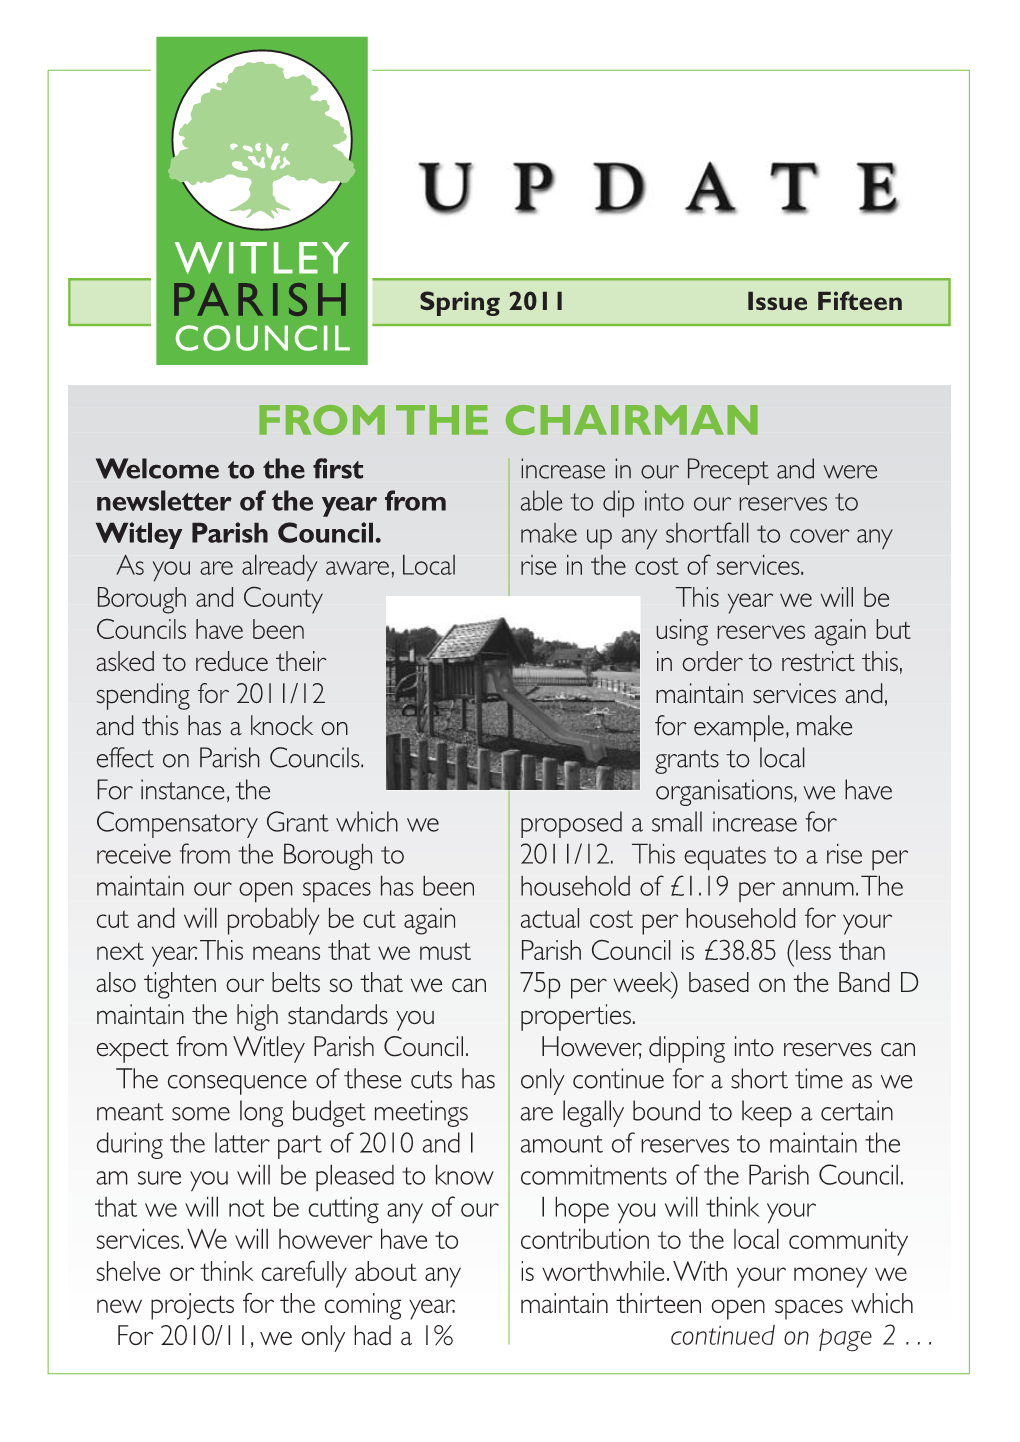 FROM the CHAIRMAN Welcome to the First Increase in Our Precept and Were Newsletter of the Year from Able to Dip Into Our Reserves to Witley Parish Council